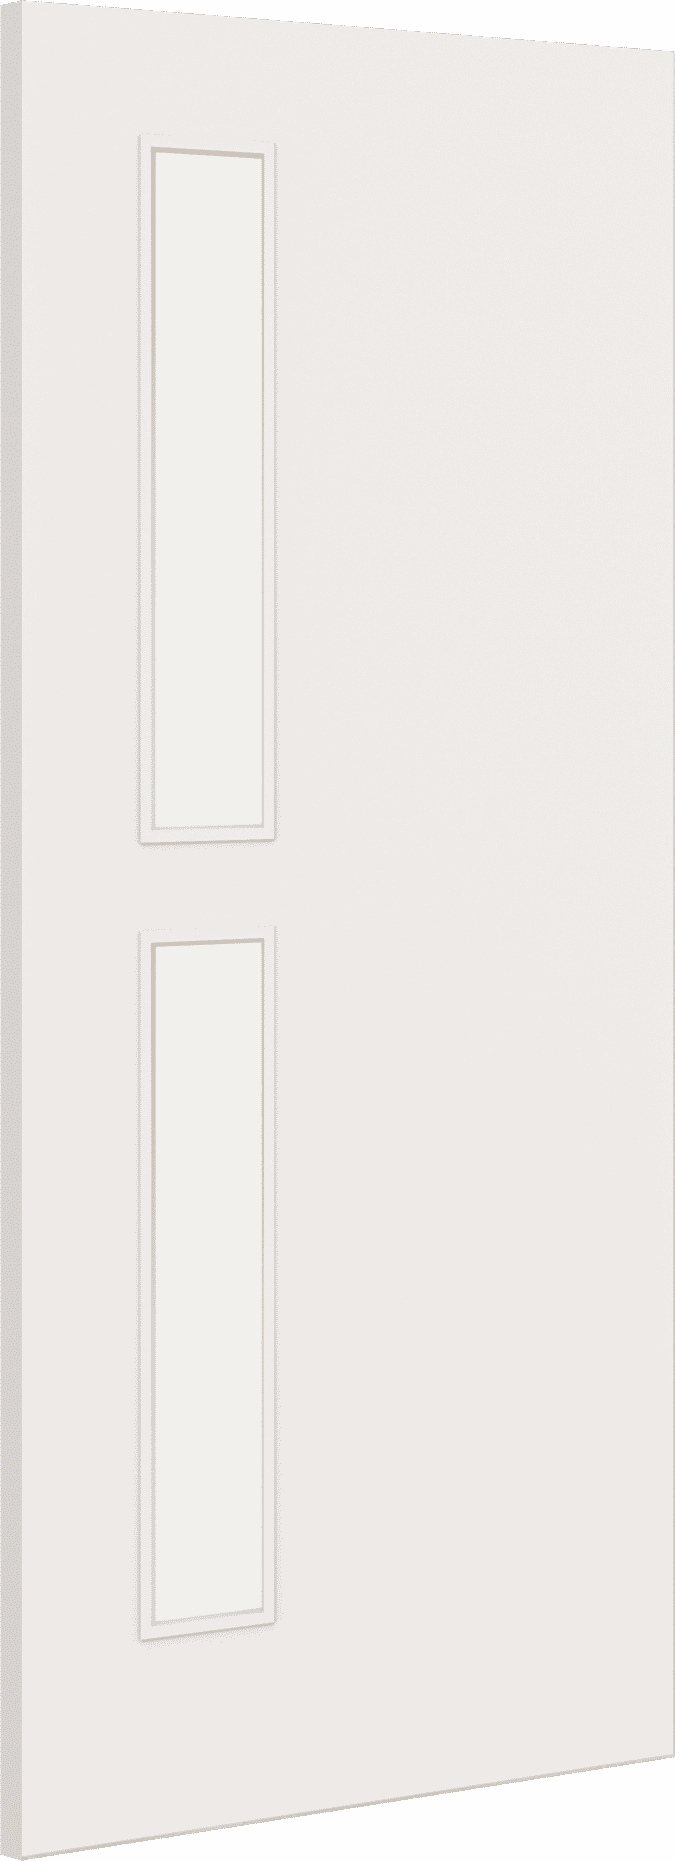 1981mm x 686mm x 44mm (27") Architectural Paint Grade White 07 Frosted Glazed Fire Door Blank